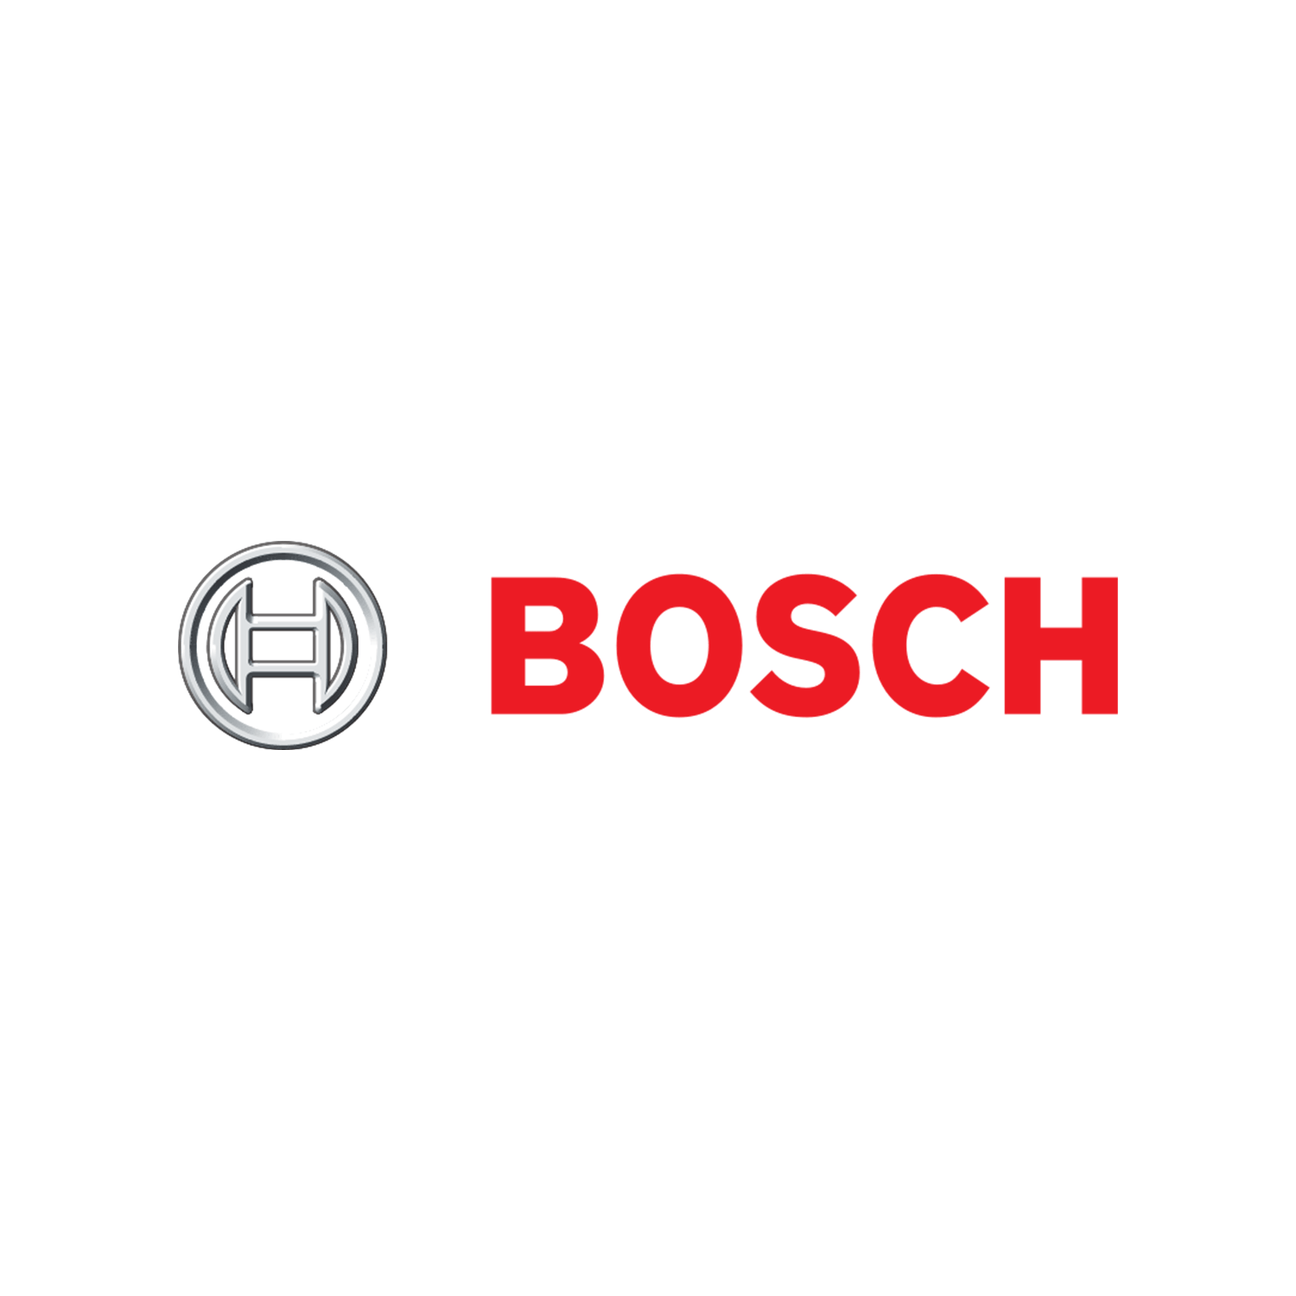 Bosch Dishwasher Parts - My Oven Spares